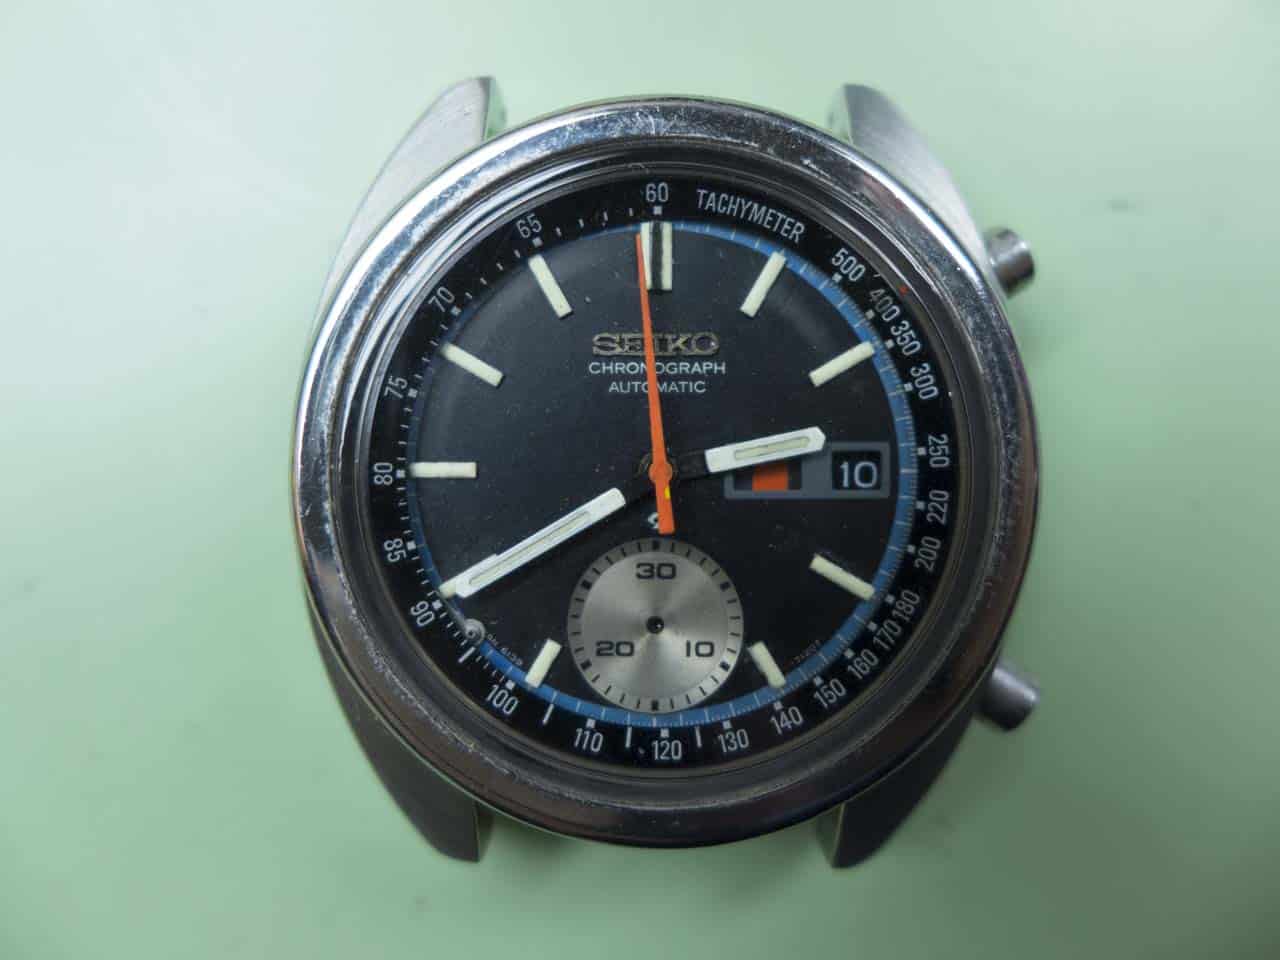 From the Archives: The Lazarus Watch – Restoring a “Franken-Seiko” 6139 Chronograph